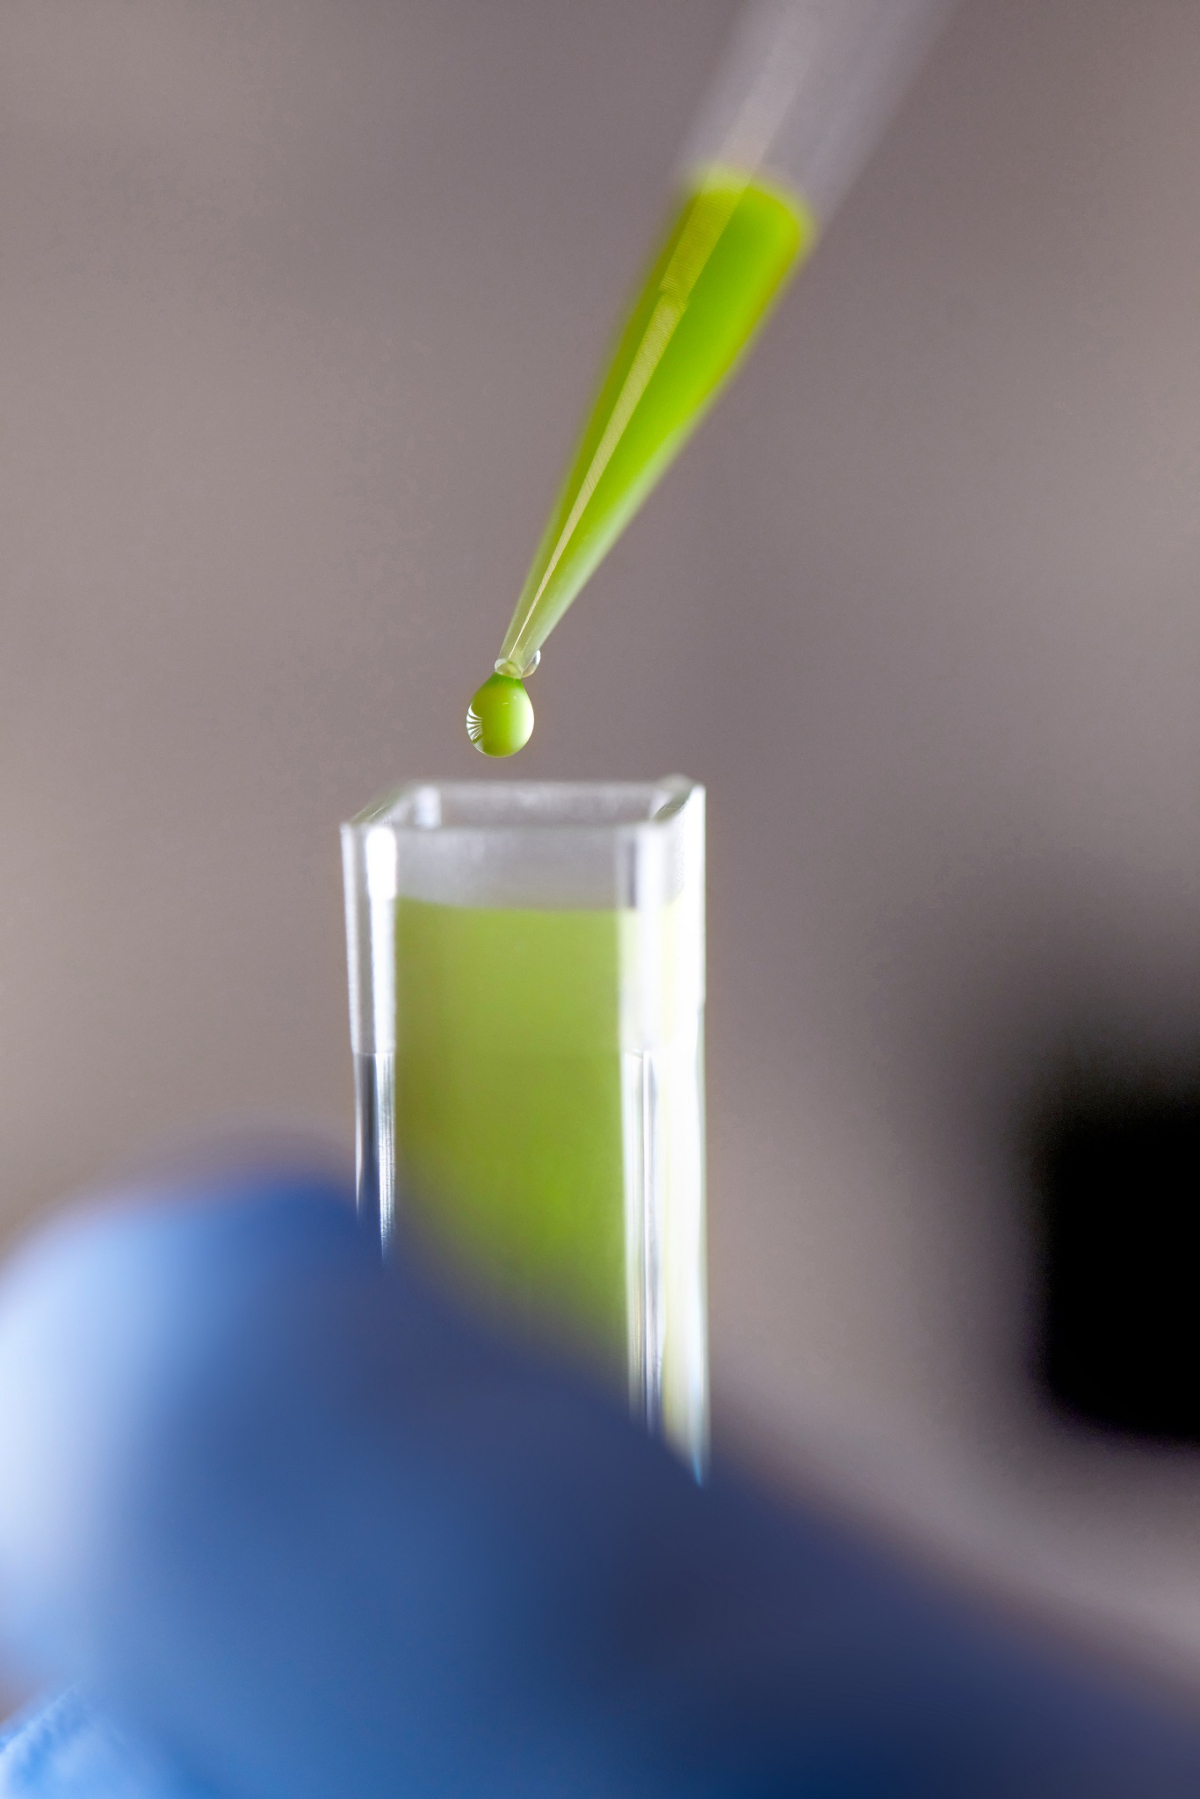 Microalgae such as chlorella can be used in food and personal care products and as a feedstock.